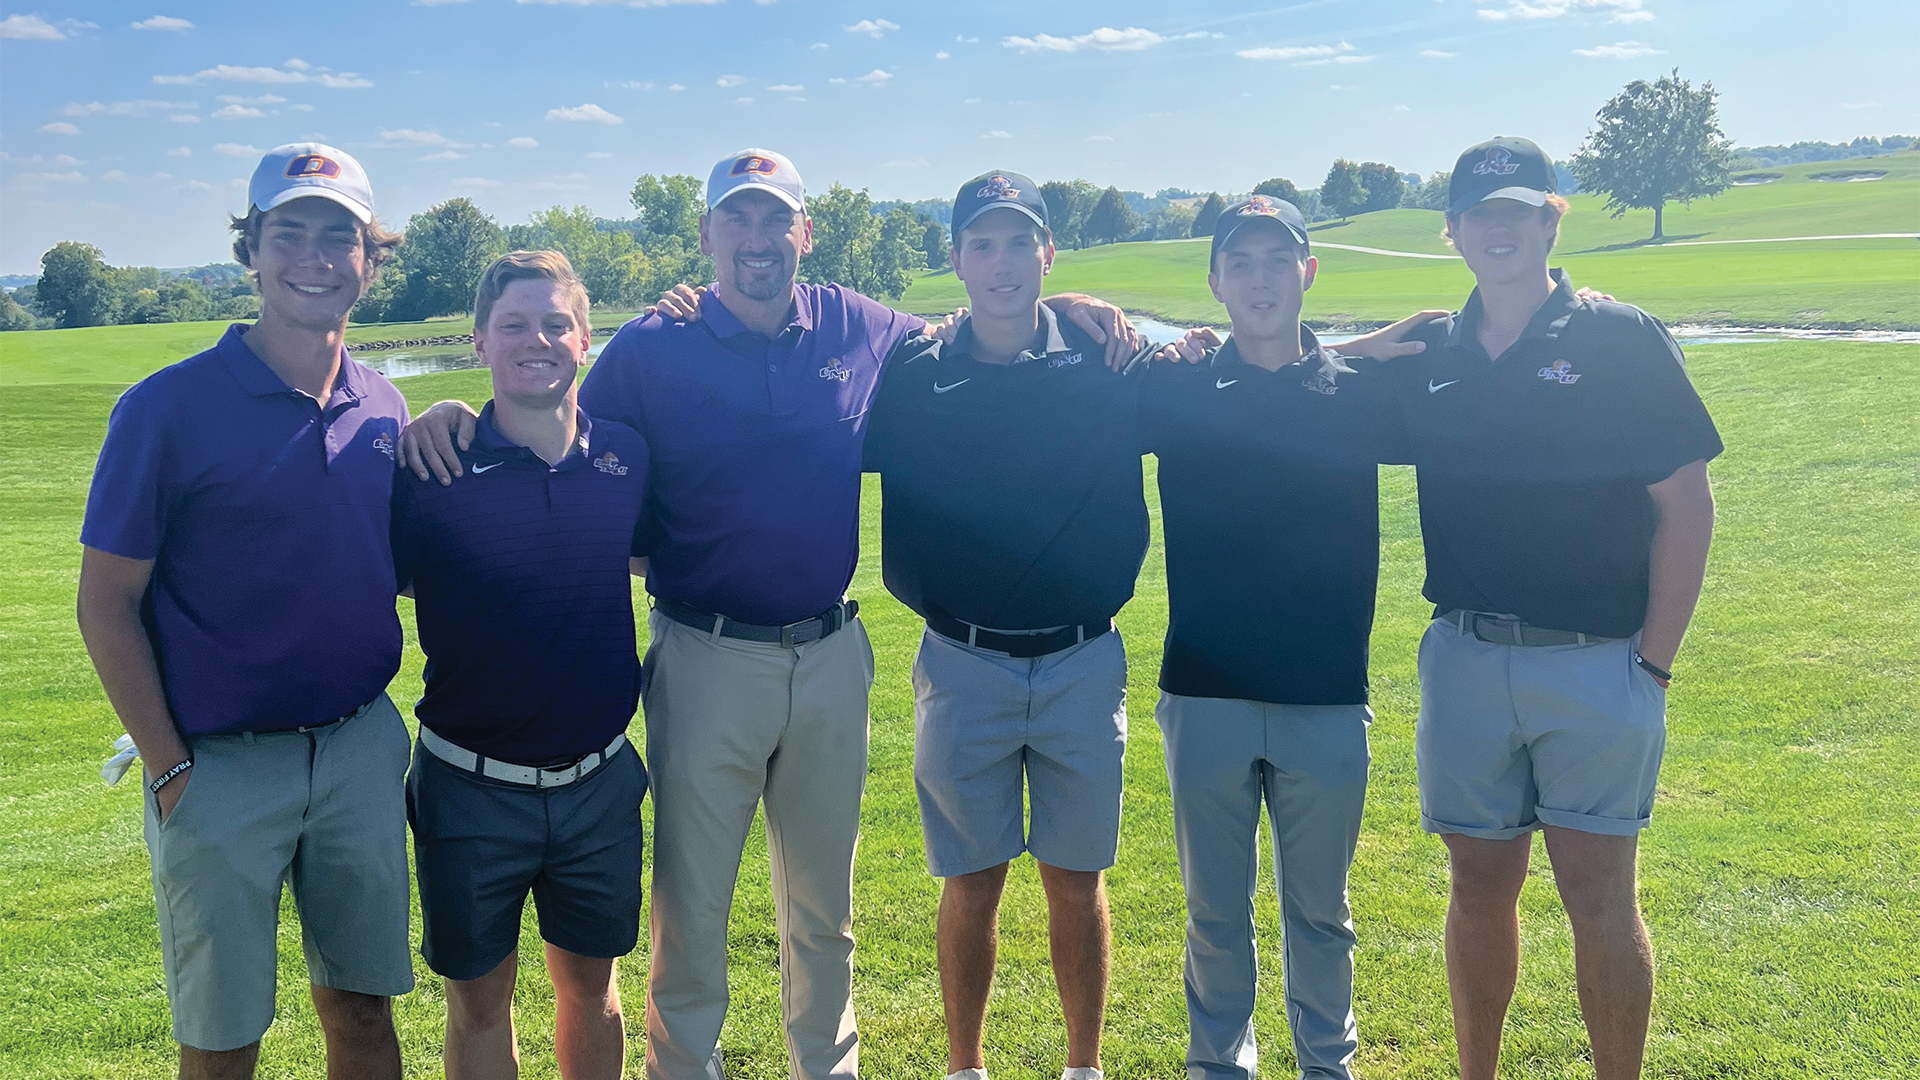 SIGNORINI CLAIMS MEDALIST HONORS AS TIGERS PLACE SECOND AT TRI-STATE INVITATIONAL